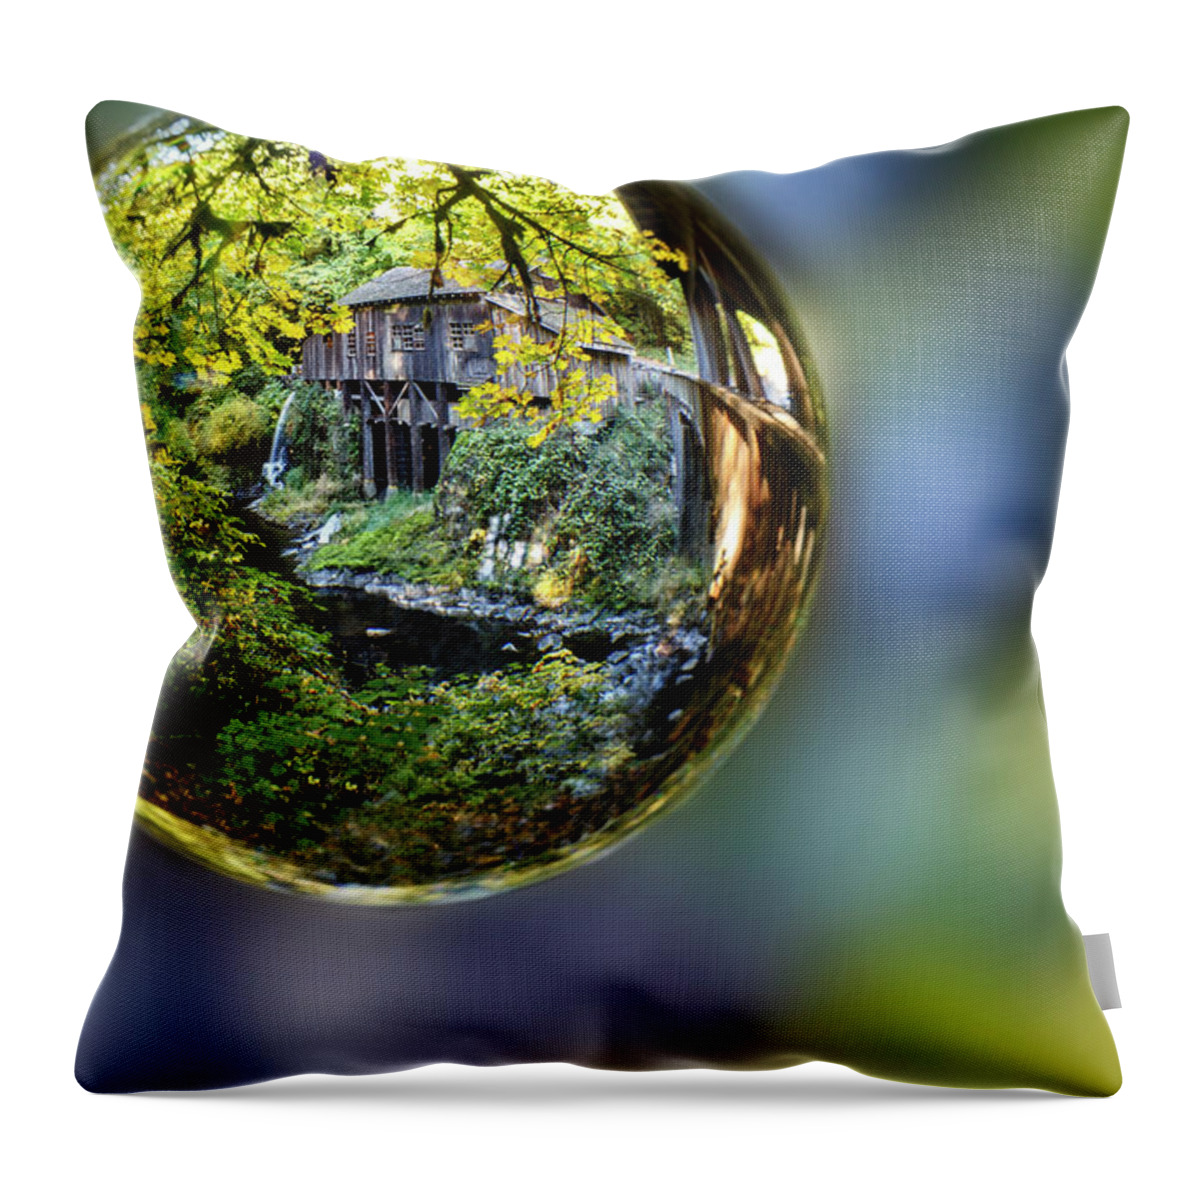 Grist Mill Capture Throw Pillow featuring the photograph Grist Mill Capture by Wes and Dotty Weber